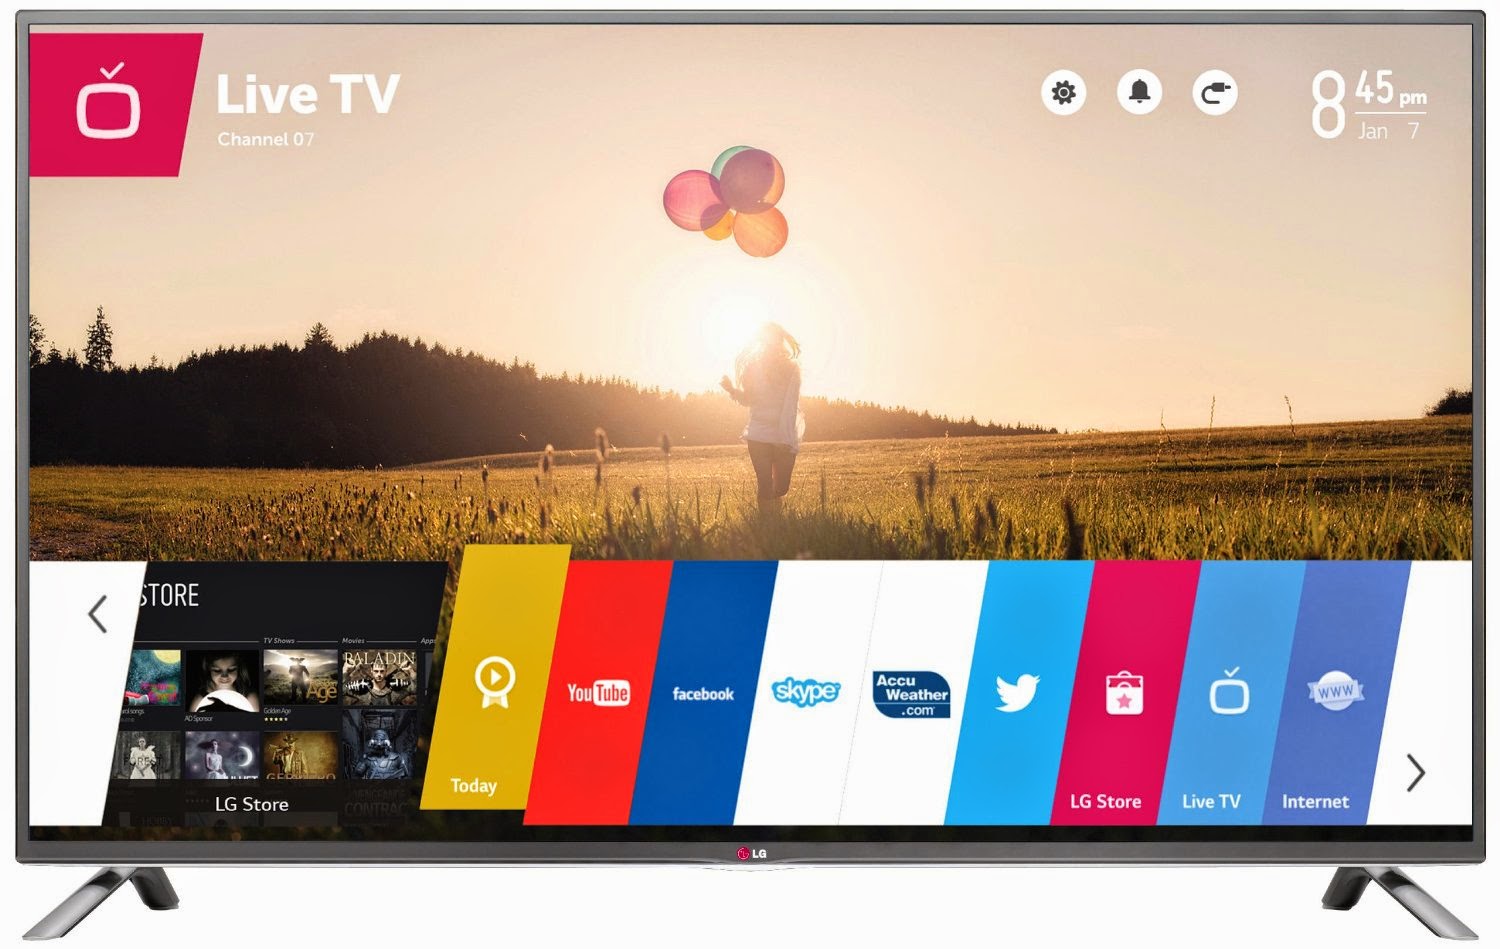 Spotify is available on LG Smart TVs - The Spotify Community